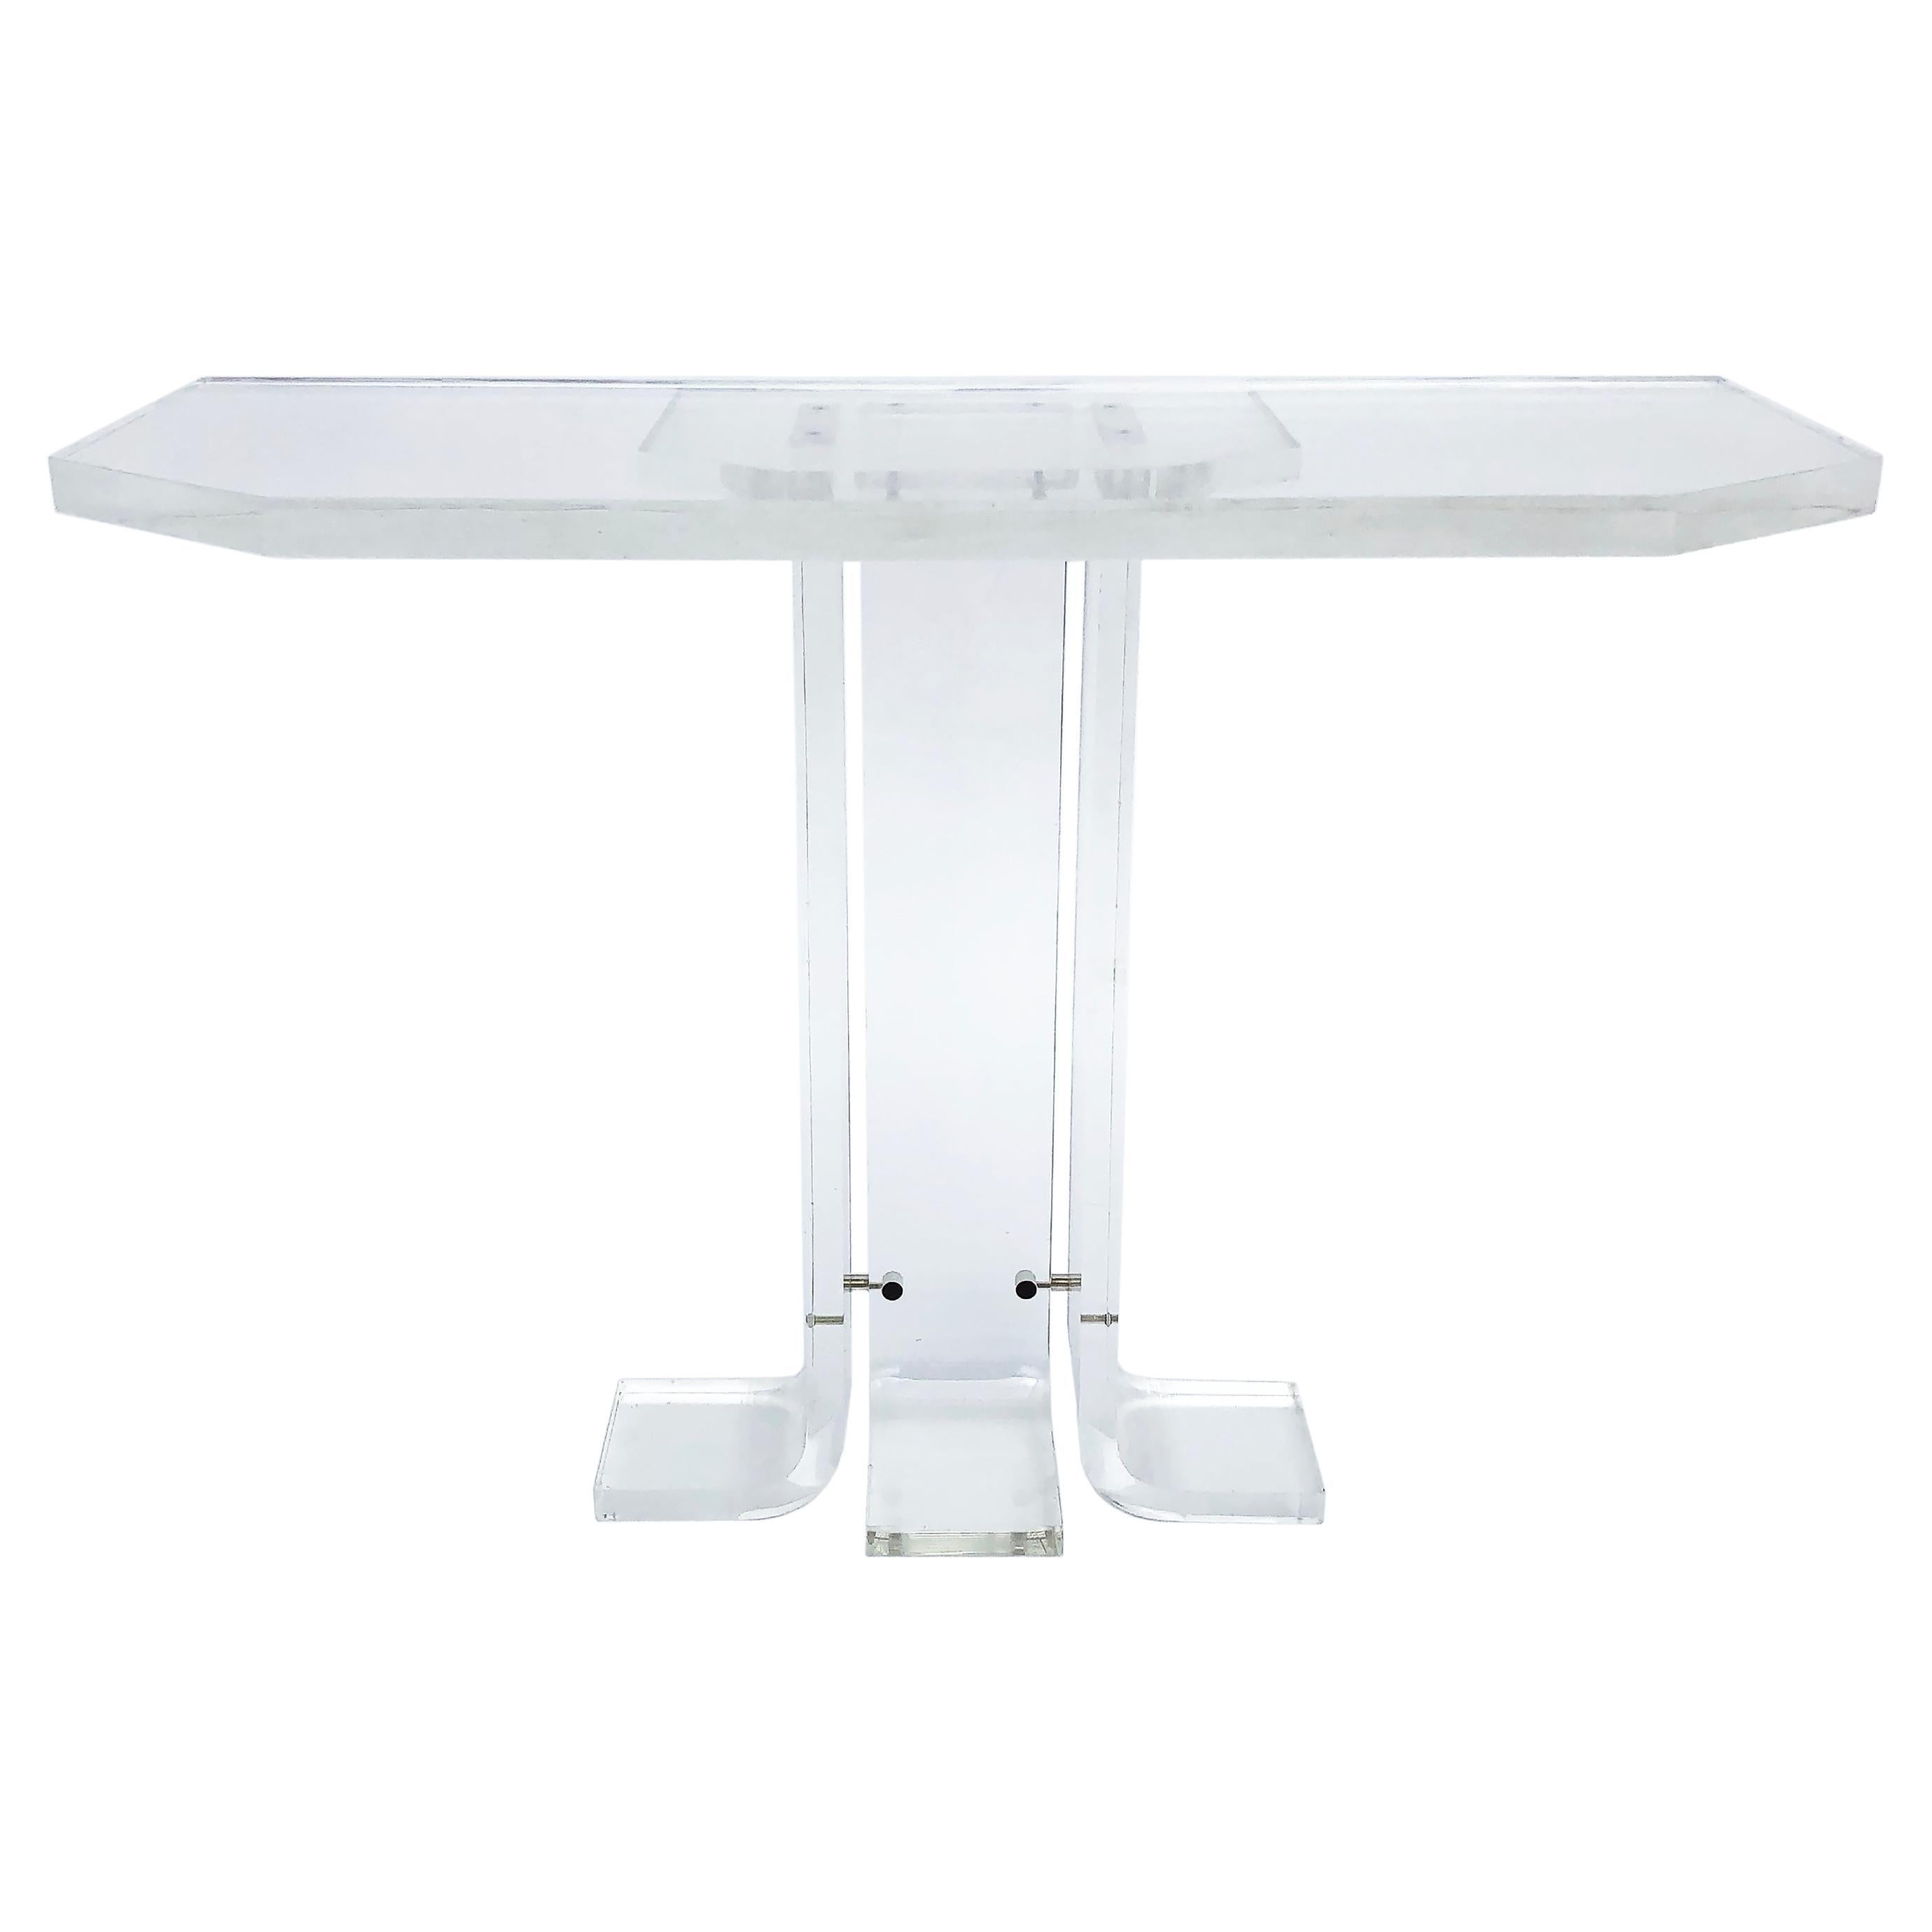 Lucite Console Table 1970s Hollywood Regency Vintage Acrylic Perspex postmodern  For Sale